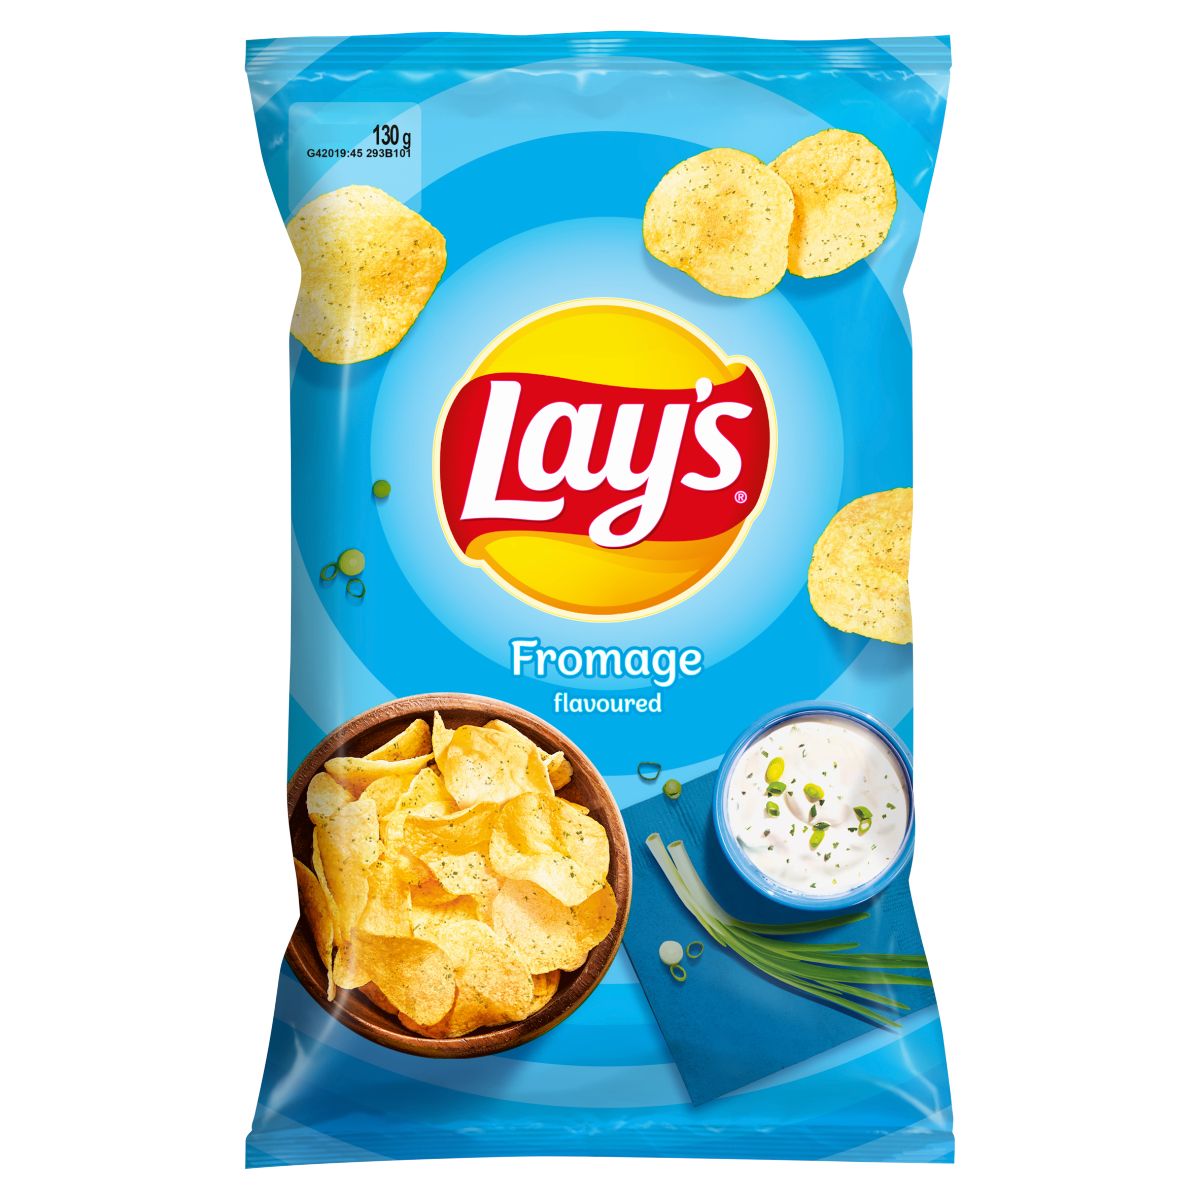 Lays - Fromage (Sour Cream & Onion) Crisps - 130g in a bag on a white background.